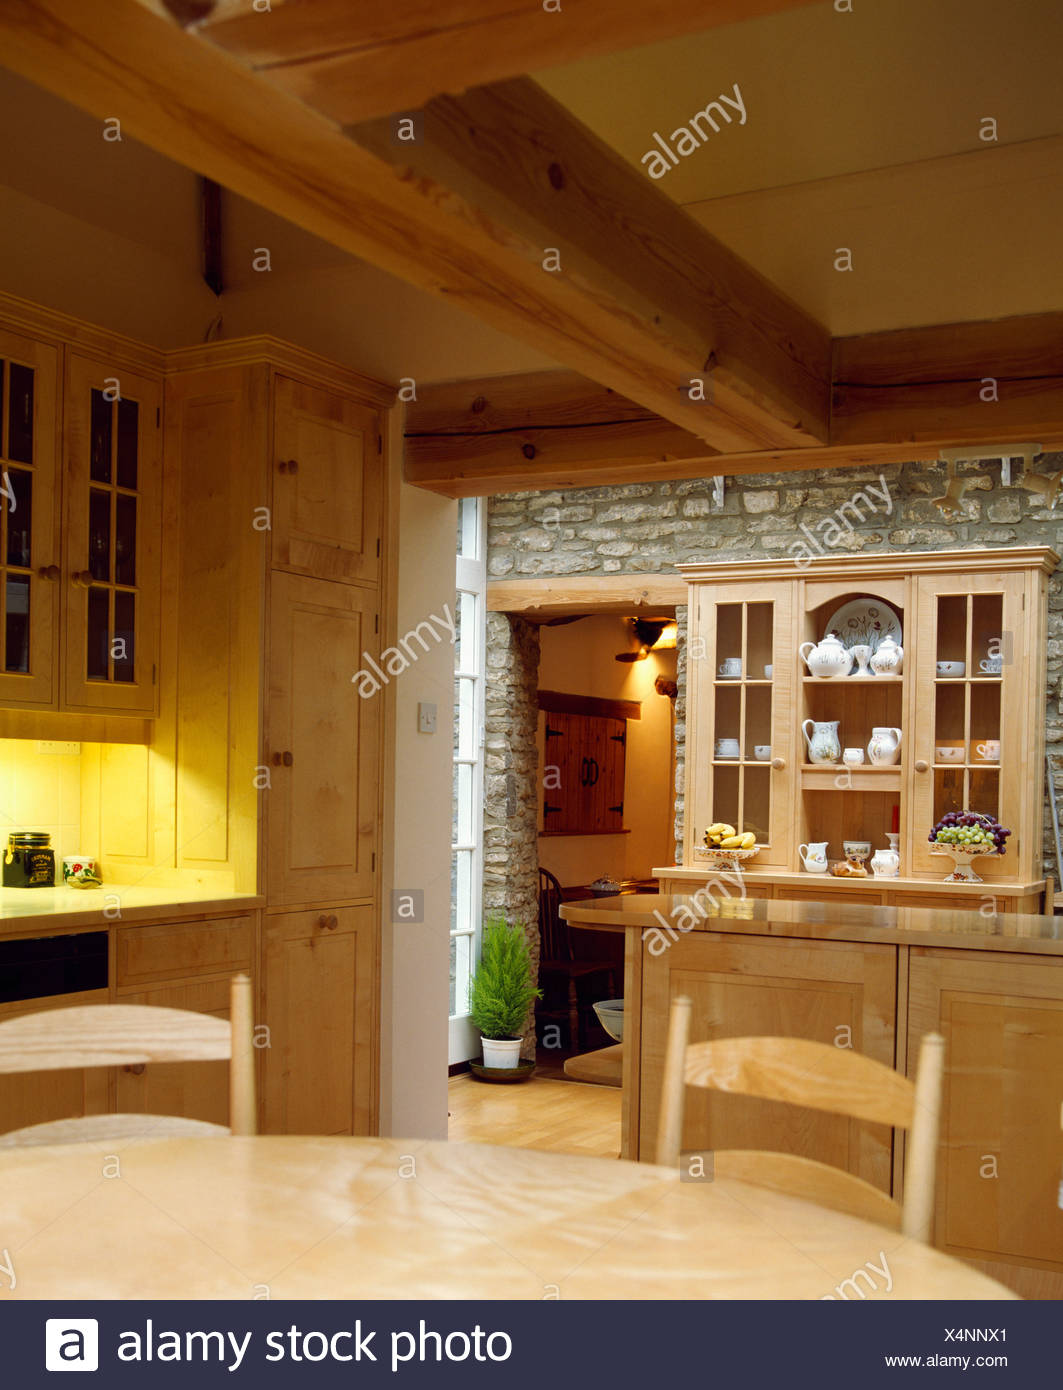 Beamed Ceiling In Country Kitchen With Pine Dresser On Stone Wall